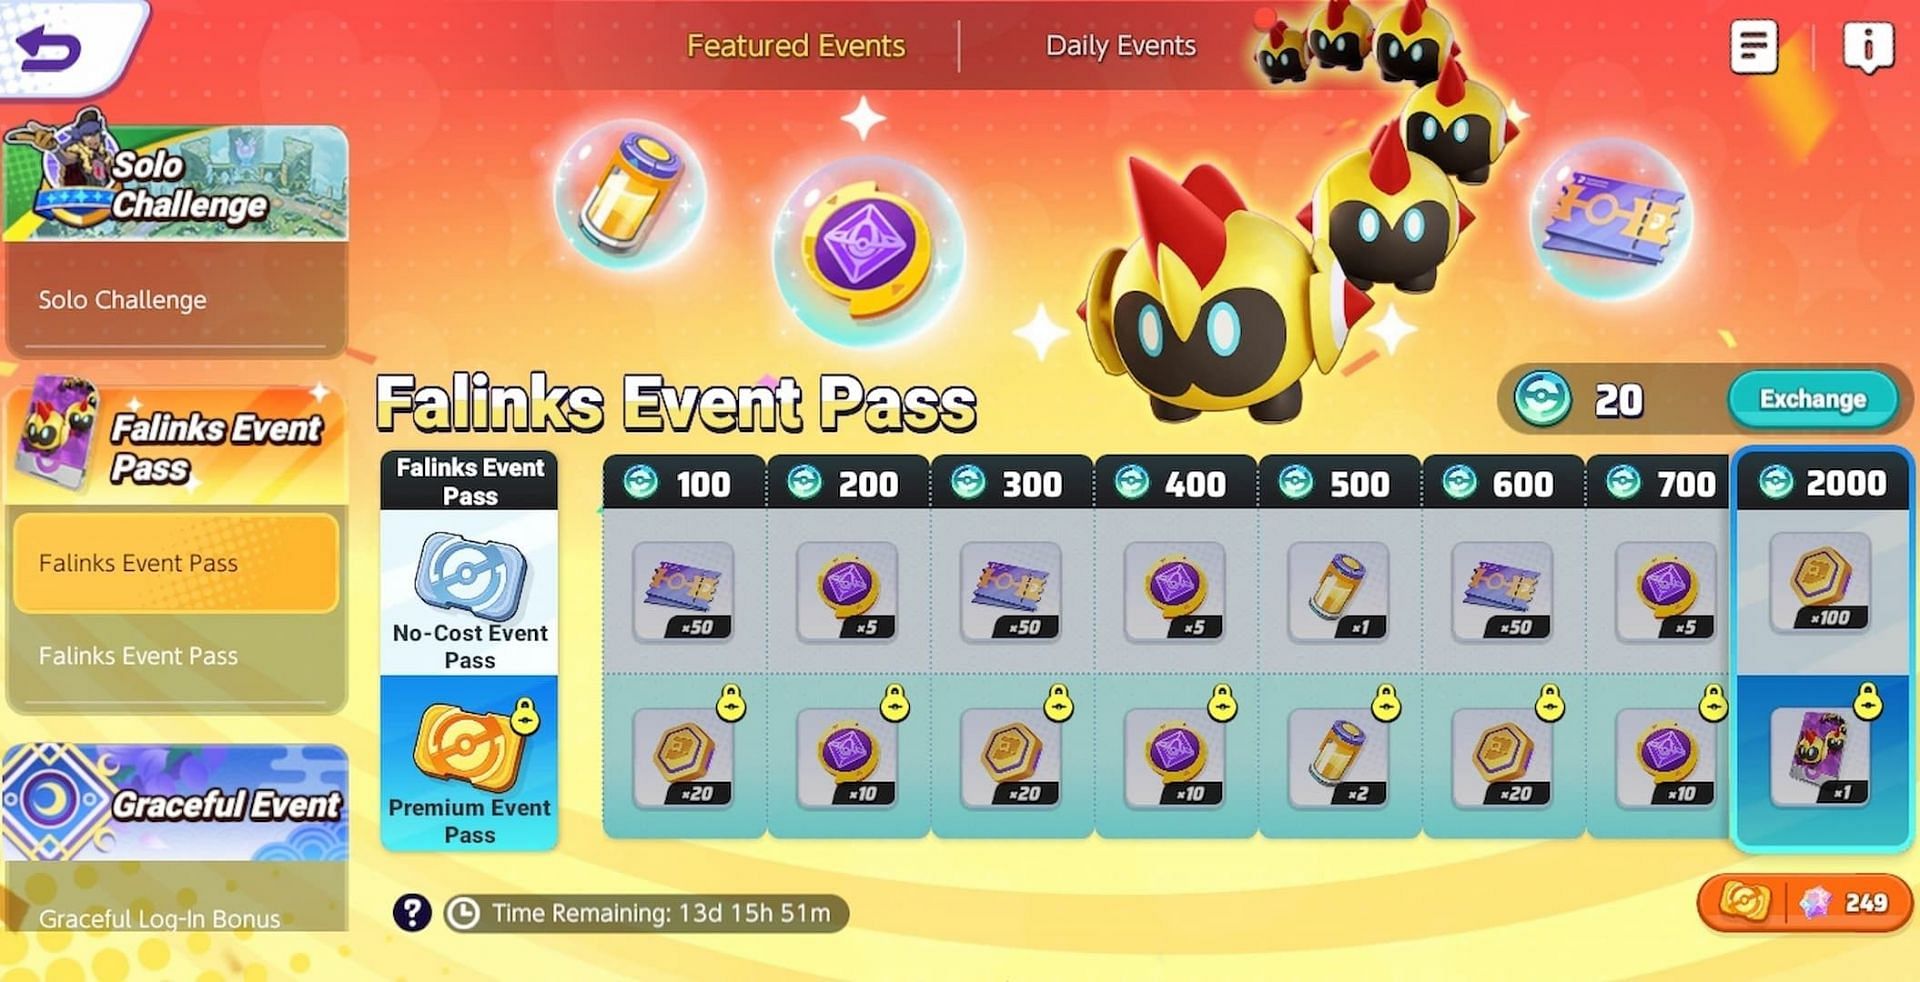 Falinks Event Pass in the game (Image via The Pokemon Company)